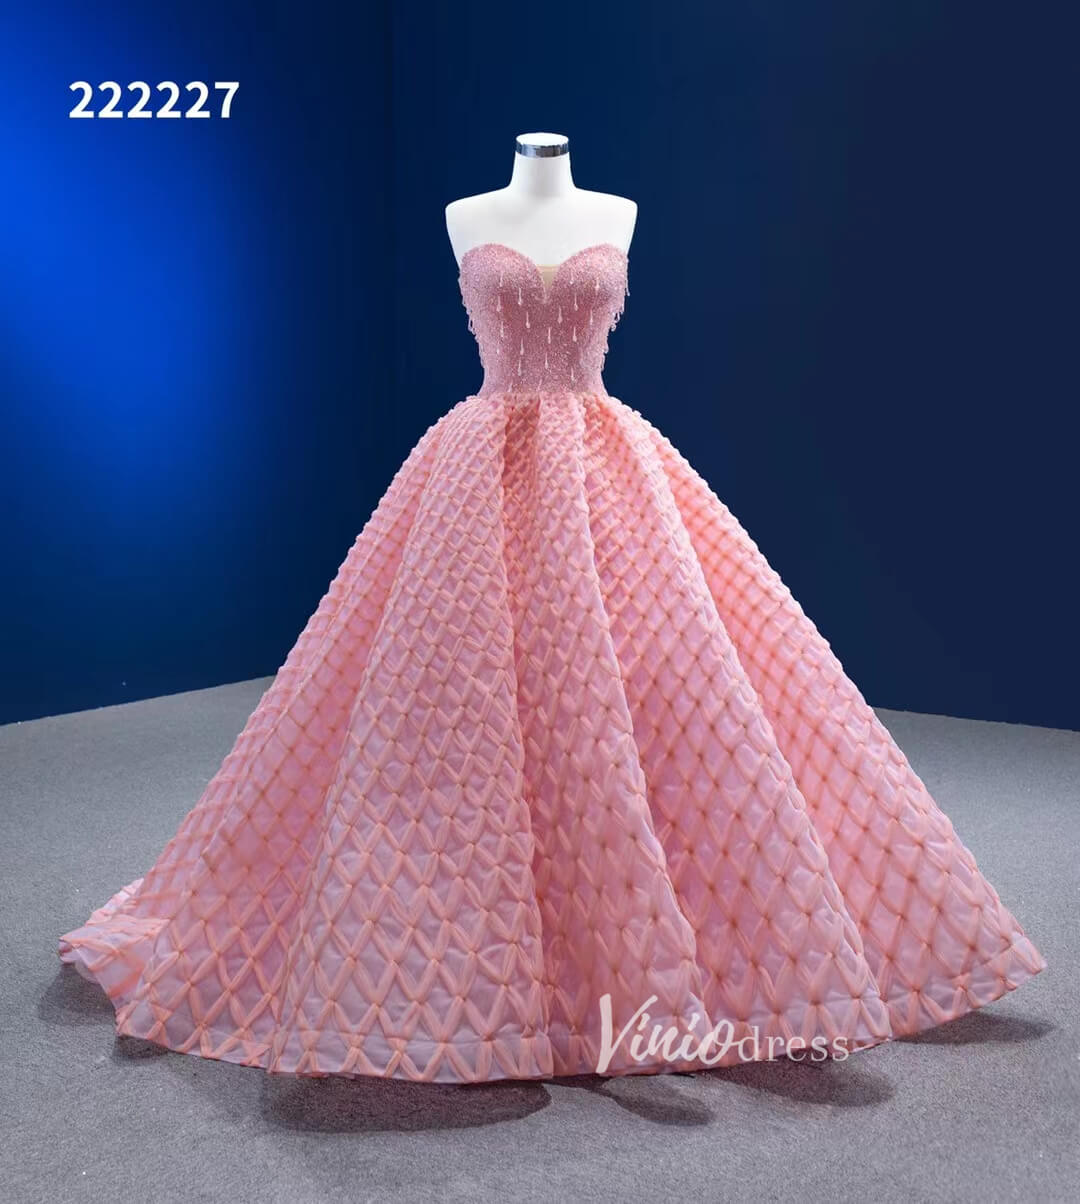 Pink Sweet 16 Dresses Braided Tulle Ball Gown Quince Dress 222227-Quinceanera Dresses-Viniodress-Viniodress